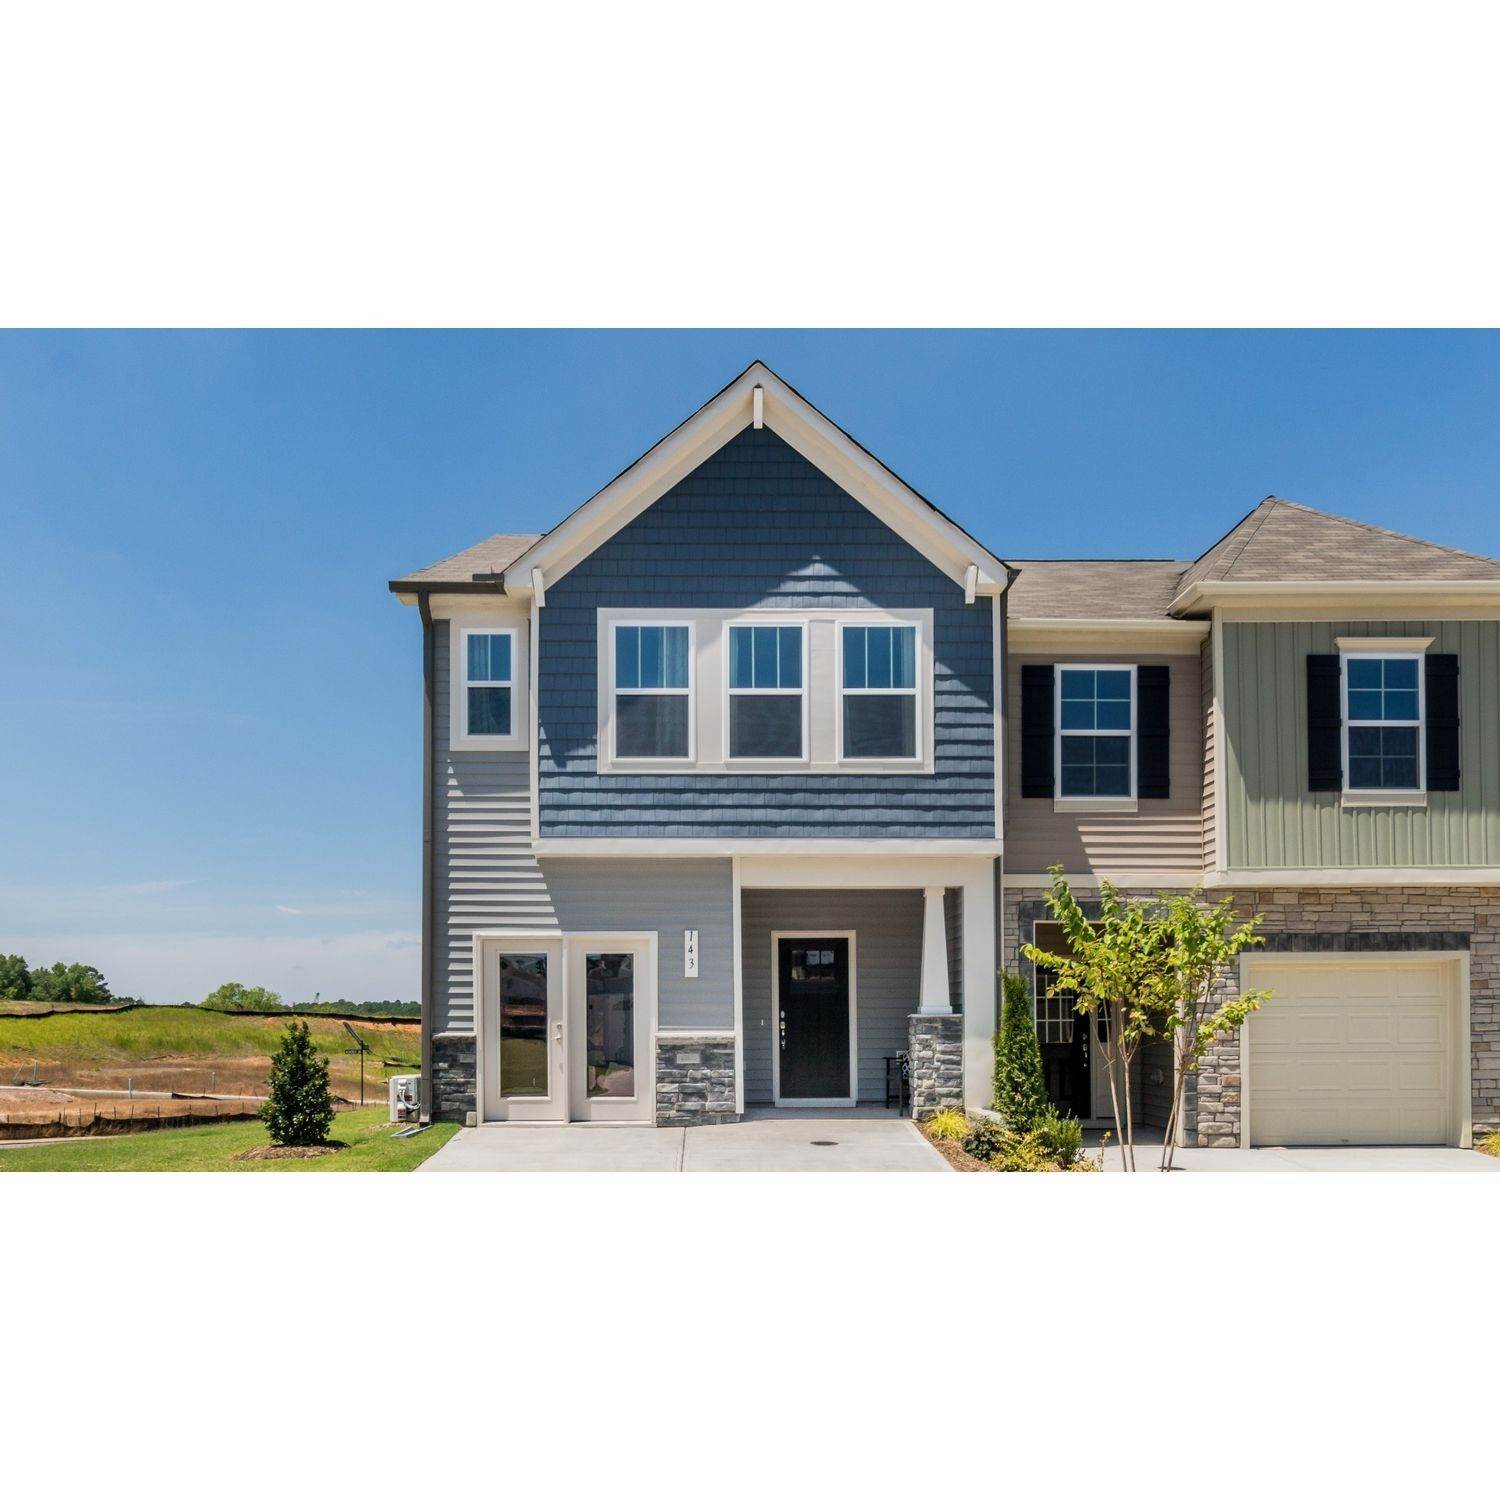 Spring Village Townhomes xây dựng tại 1133 Chalybeate Springs Road, Angier, NC 27501